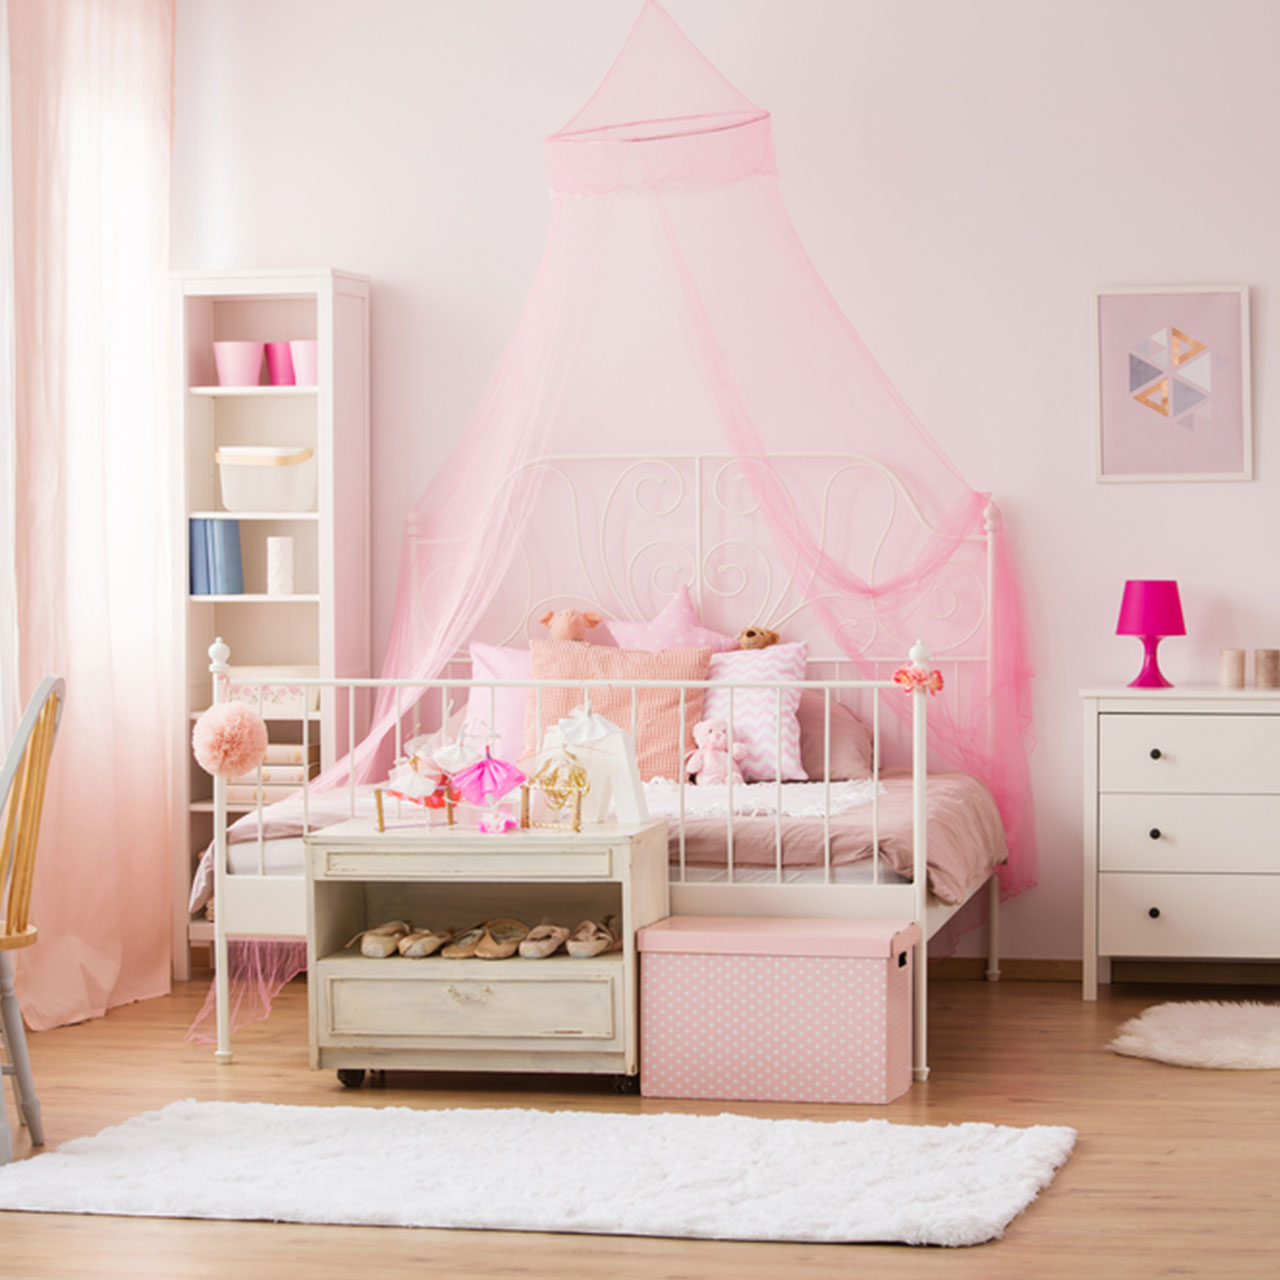 Children bedroom design when young are passionate about many things, and they often live and breathe their passion in kids bedroom design